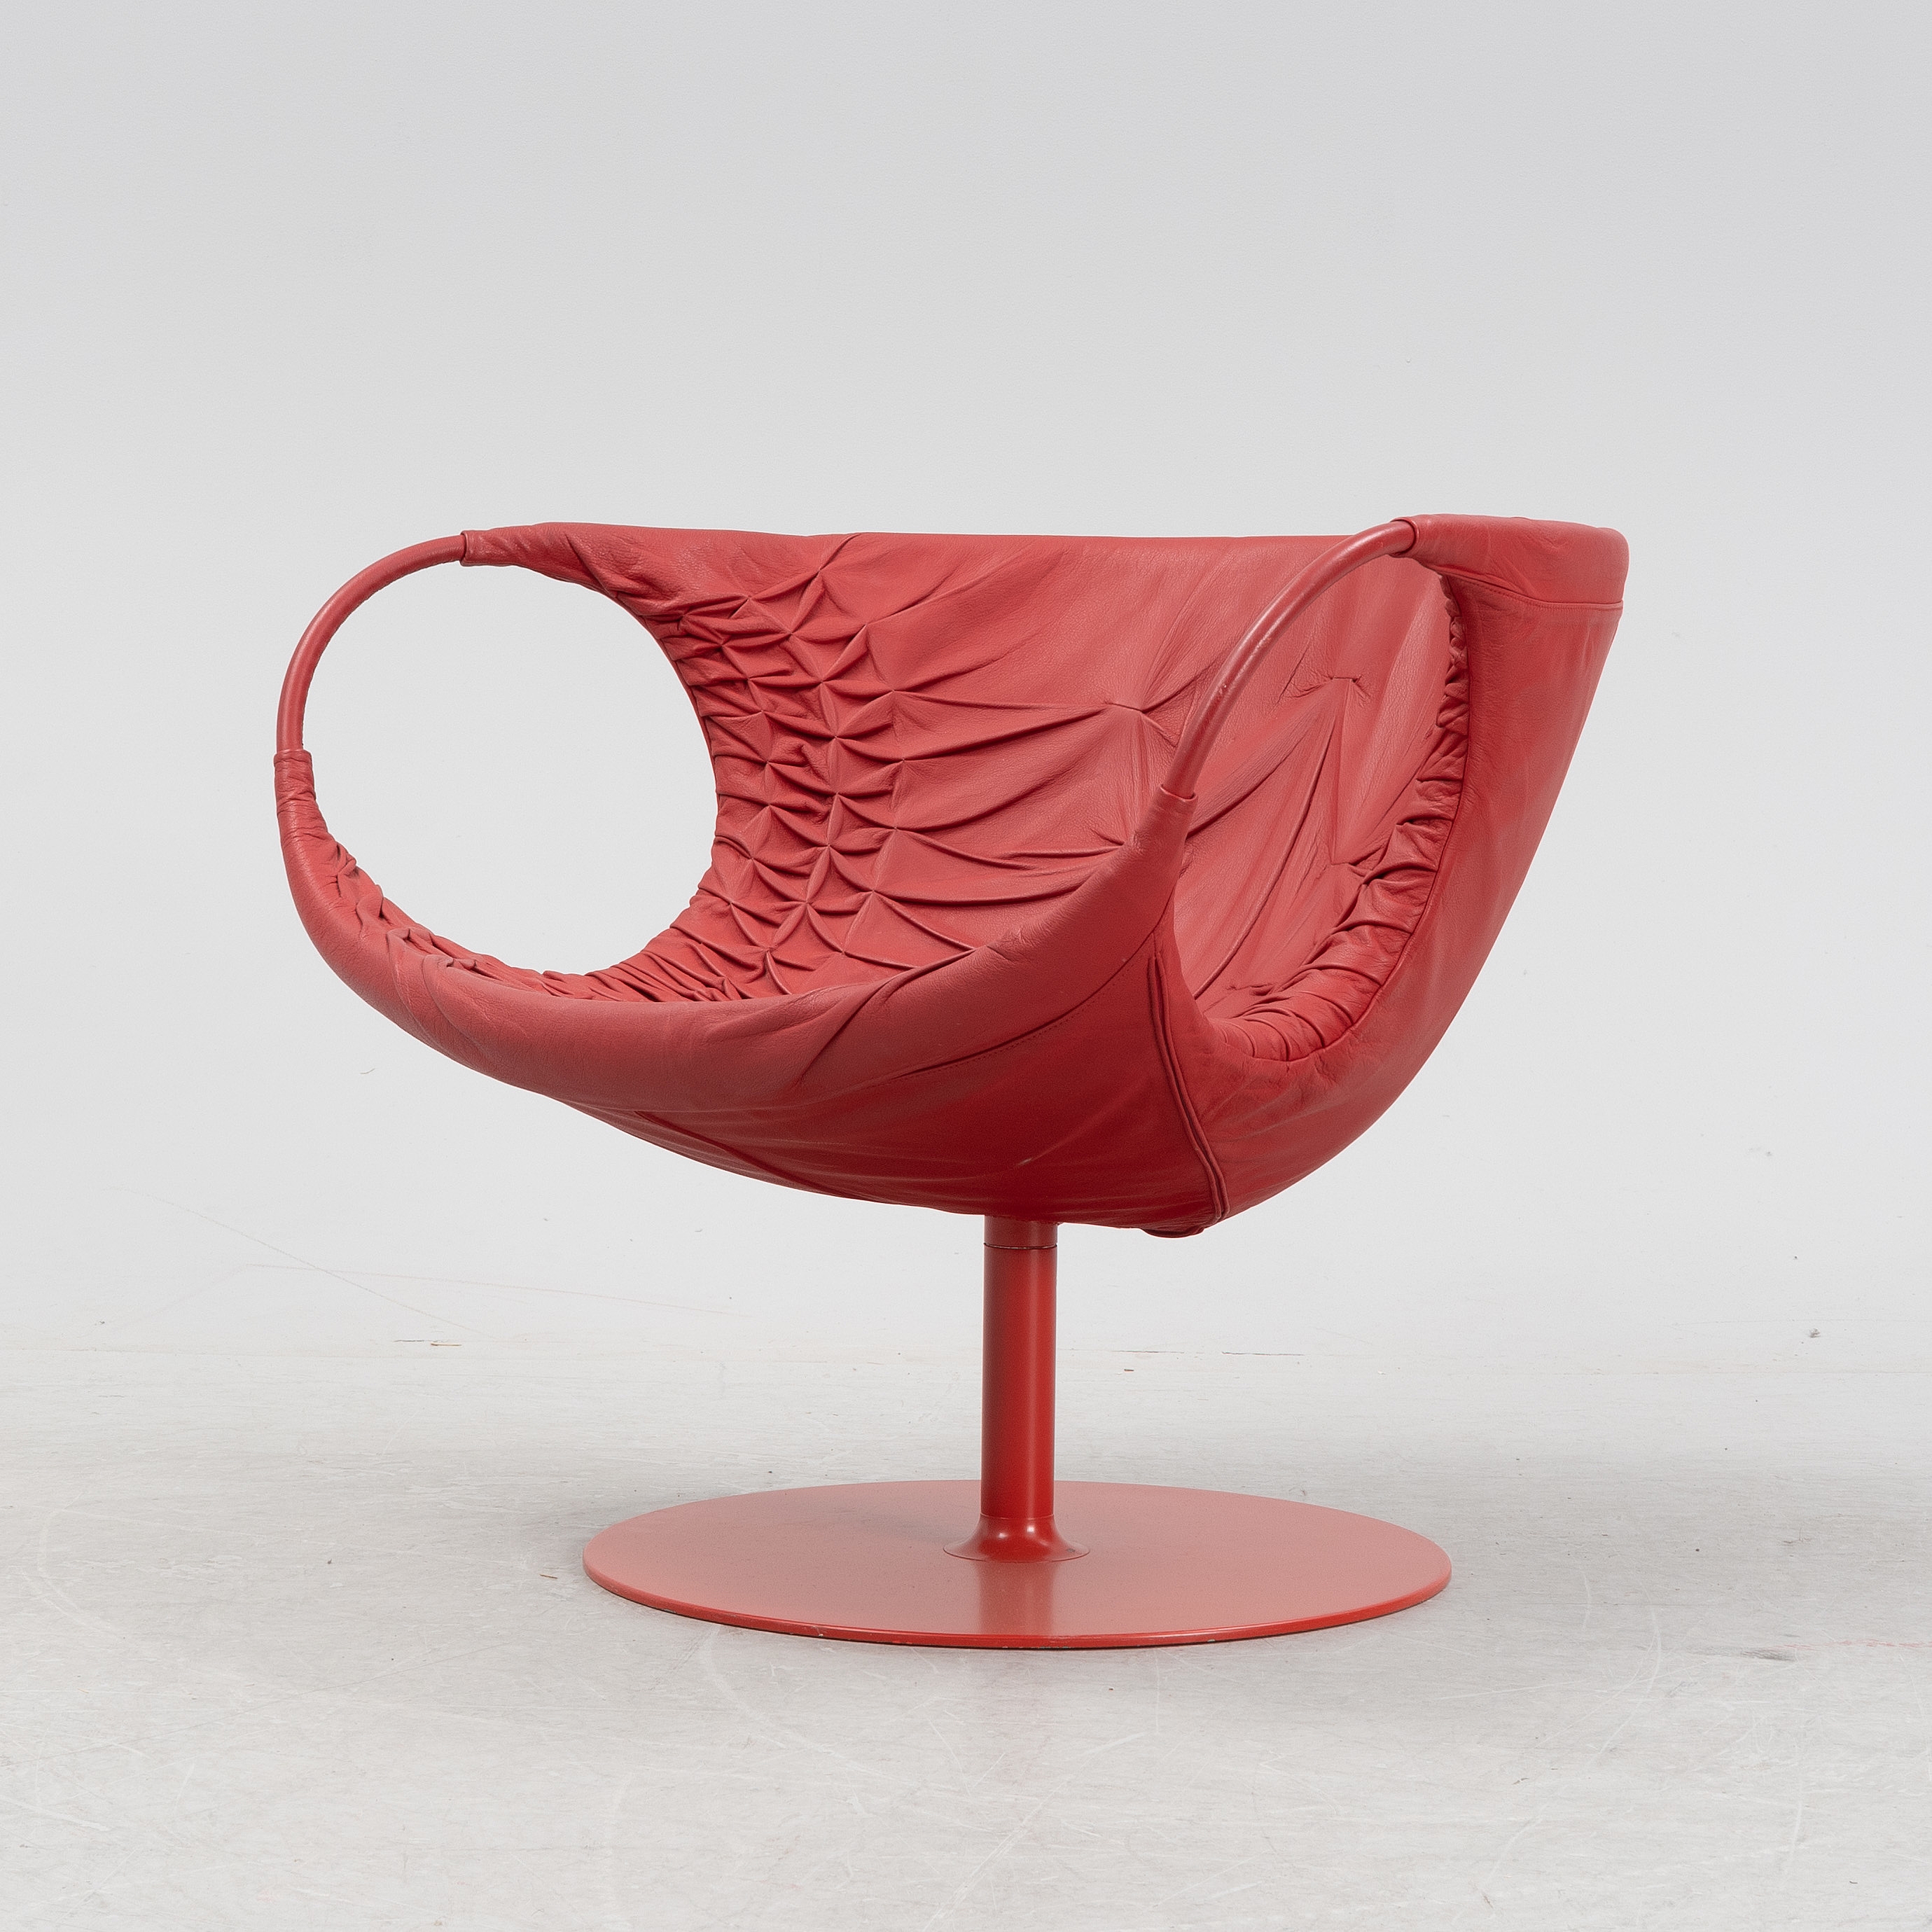 Patricia Urquiola, a 'Smock' lounge chair from Moroso Italy